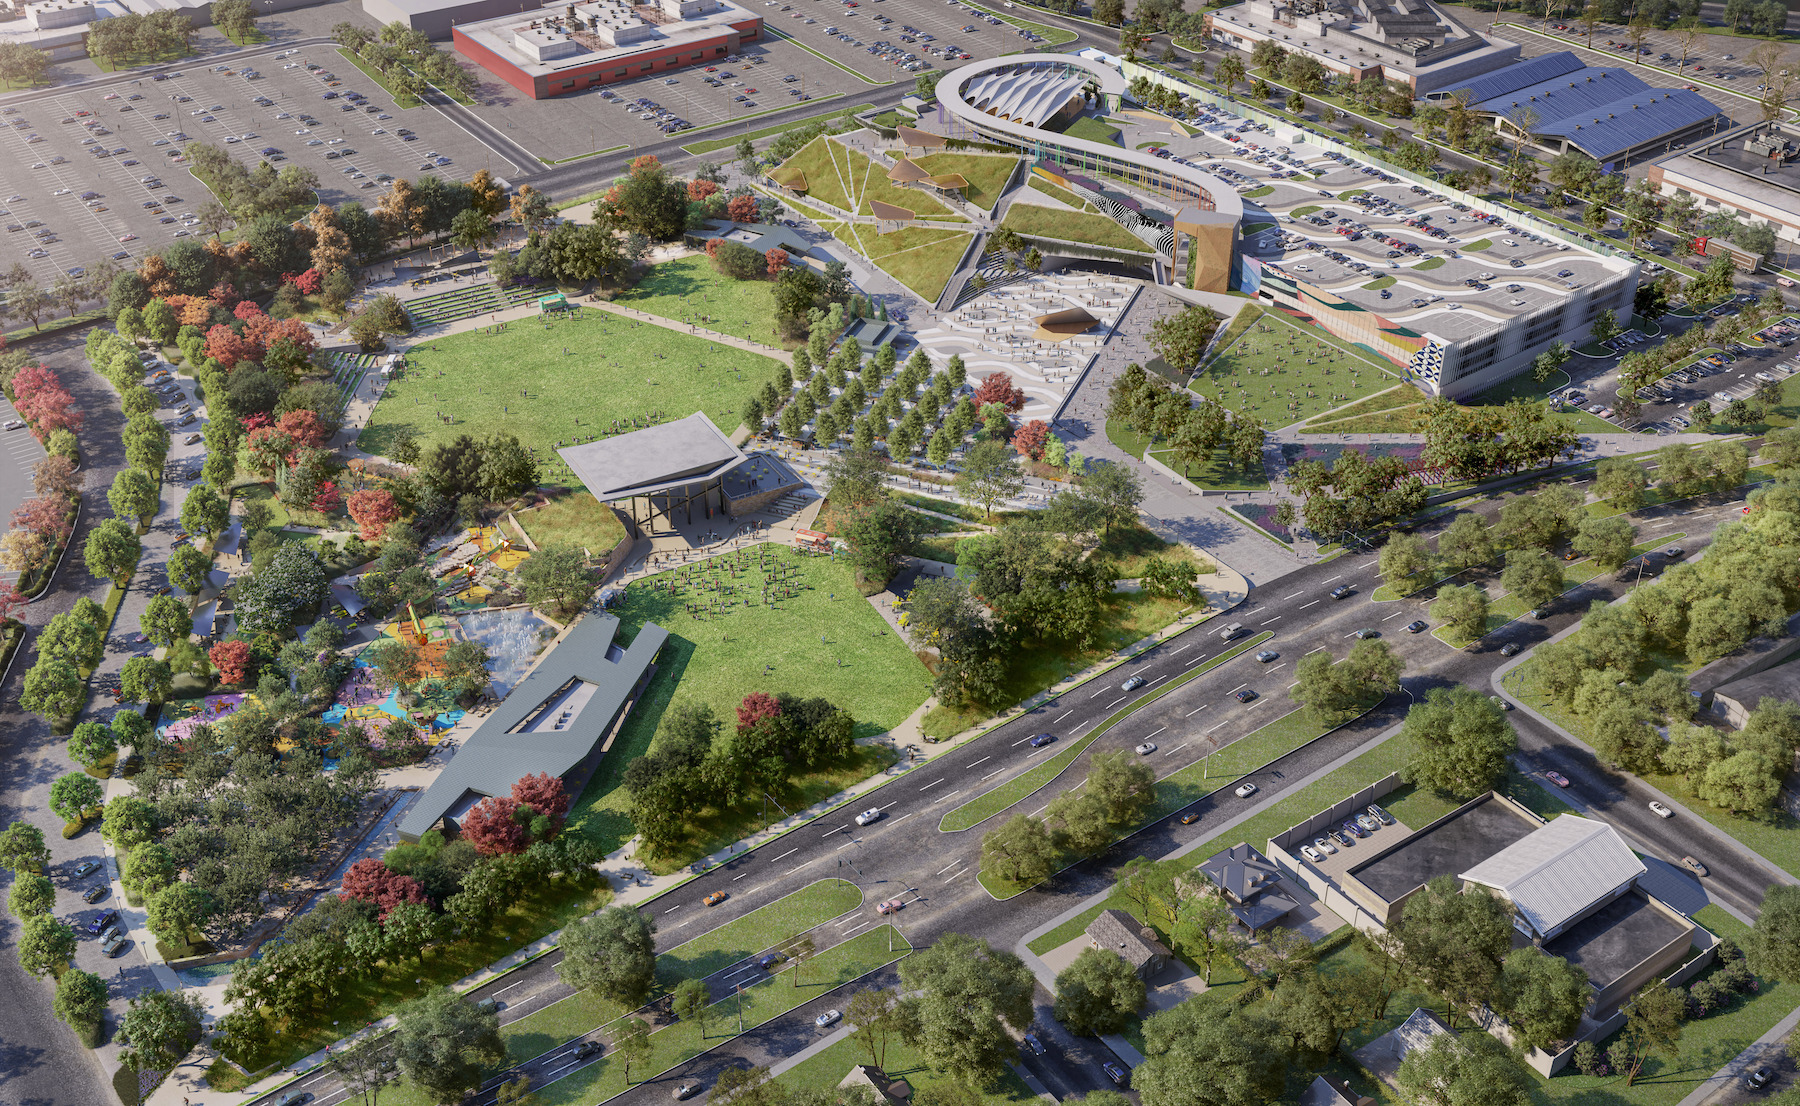 LandDesign will bring a park to the site of a former Dallas mall